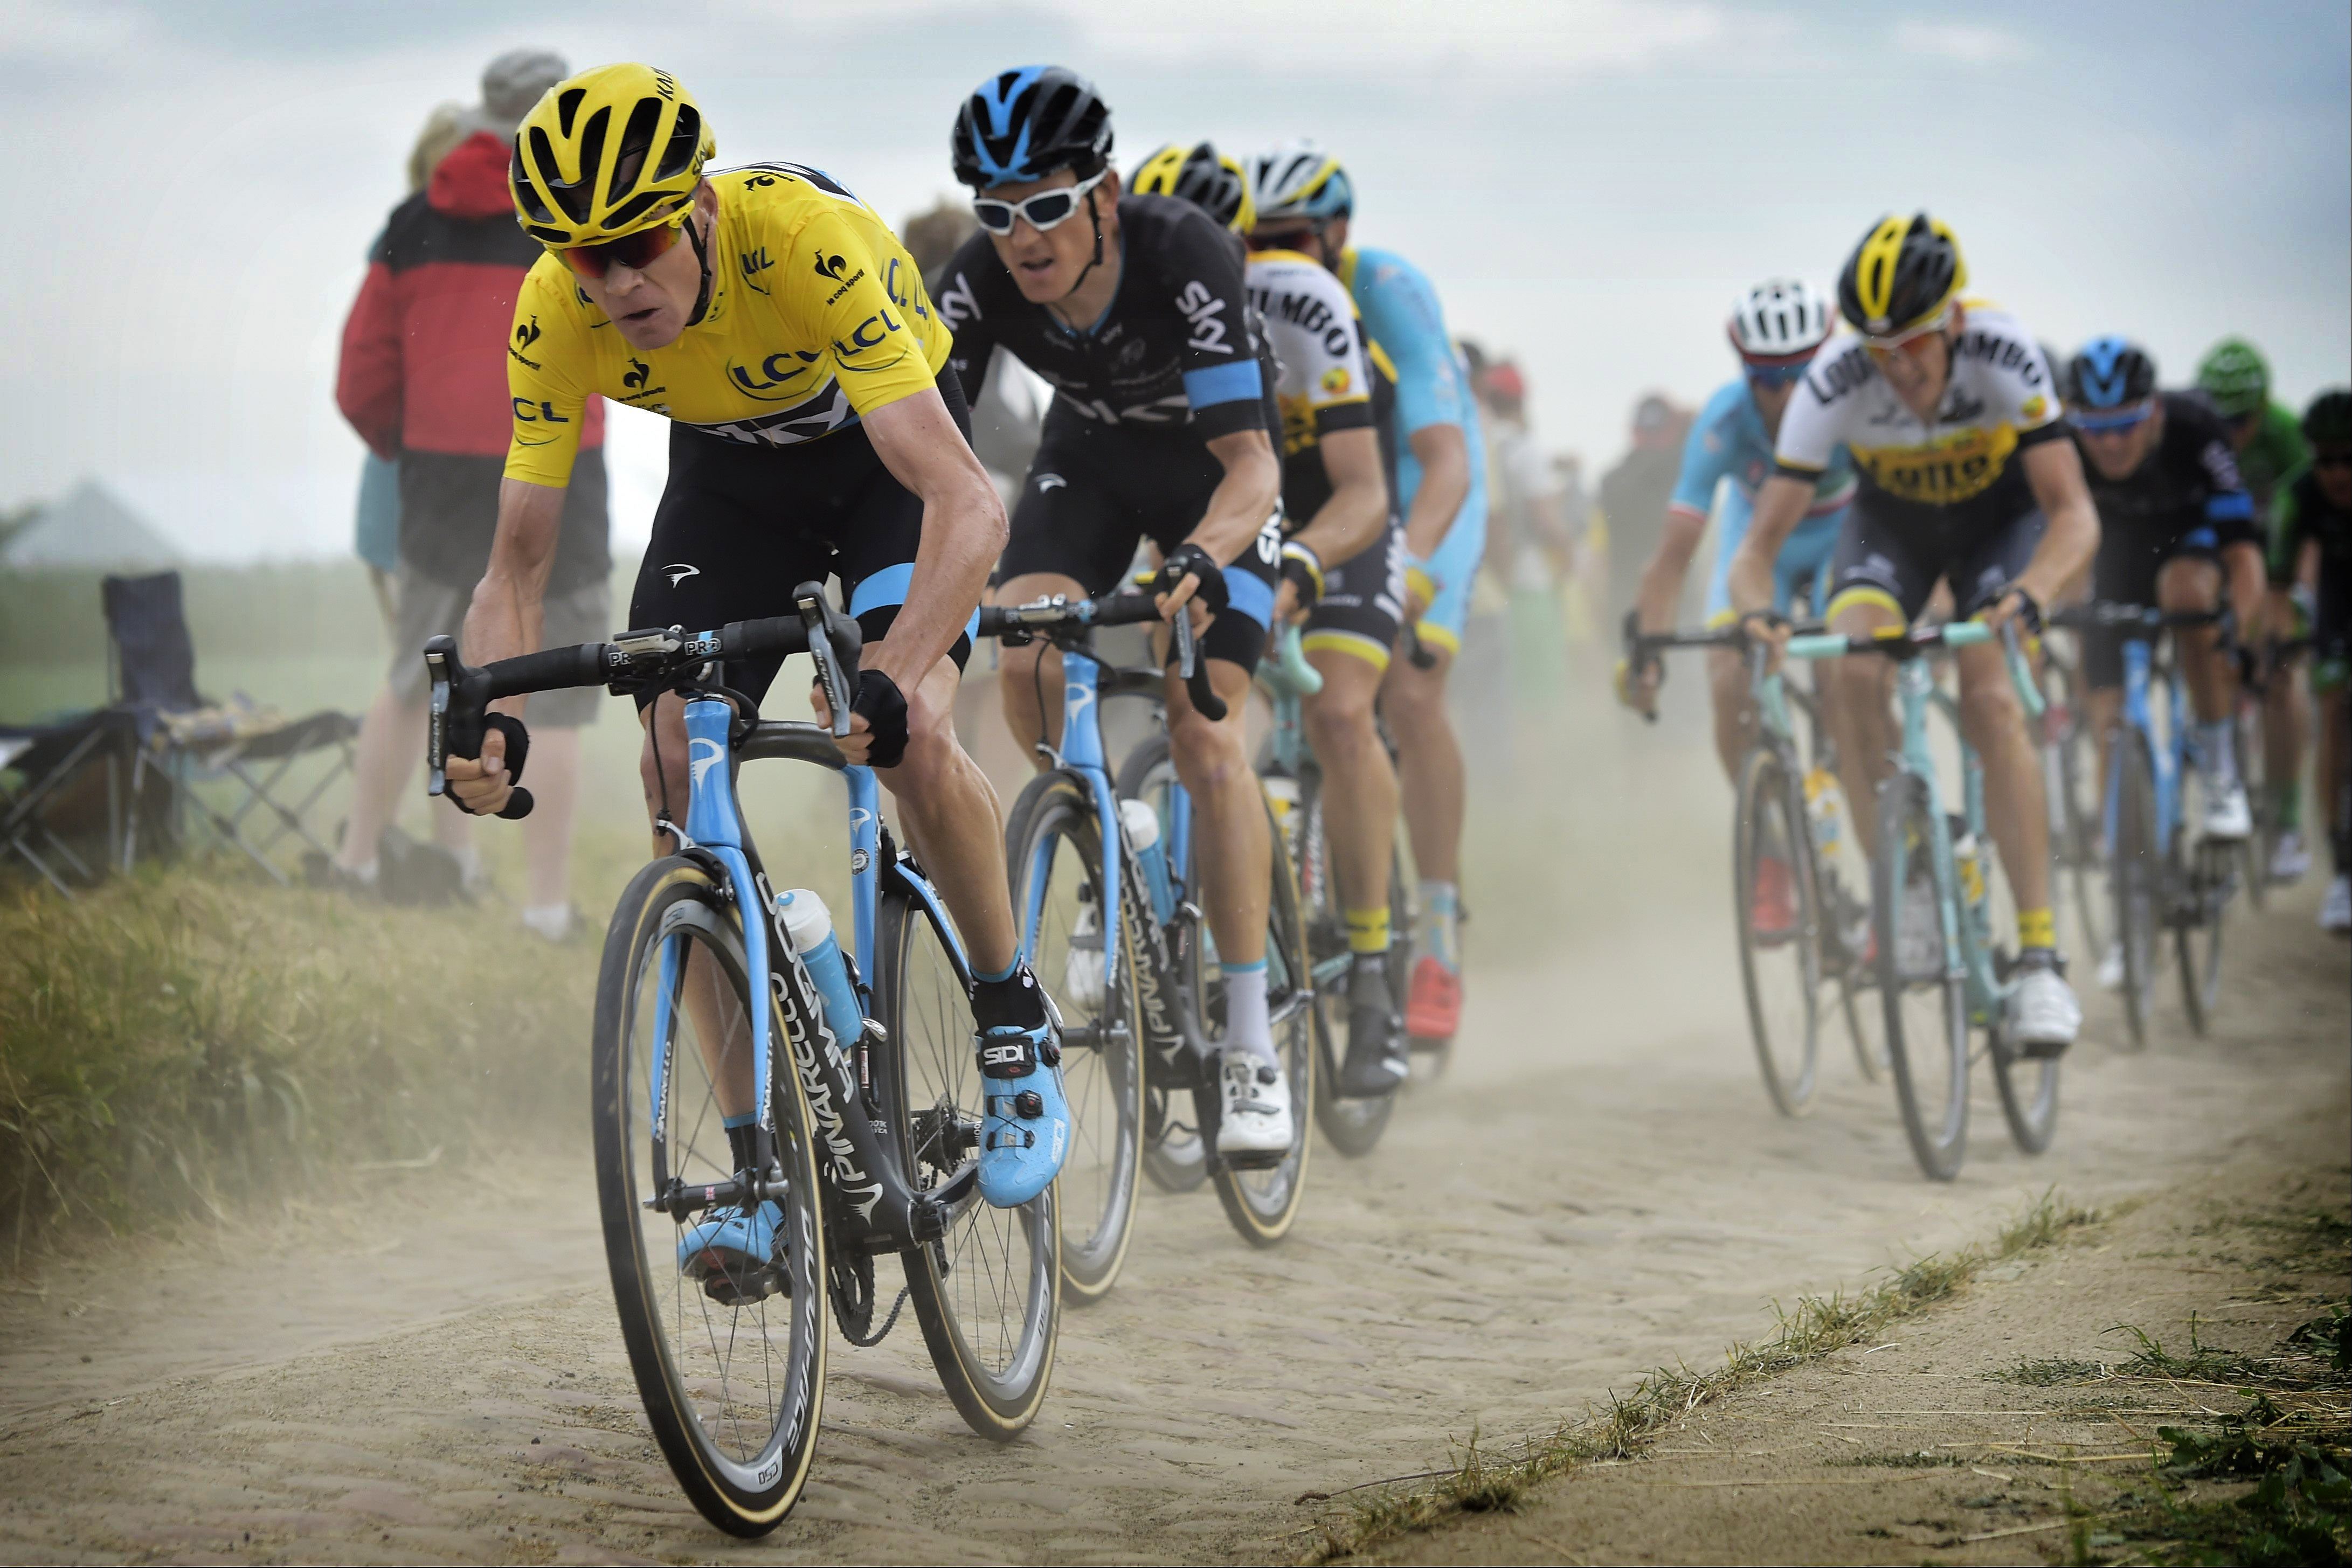 Beginners’ Guide to the Tour de France